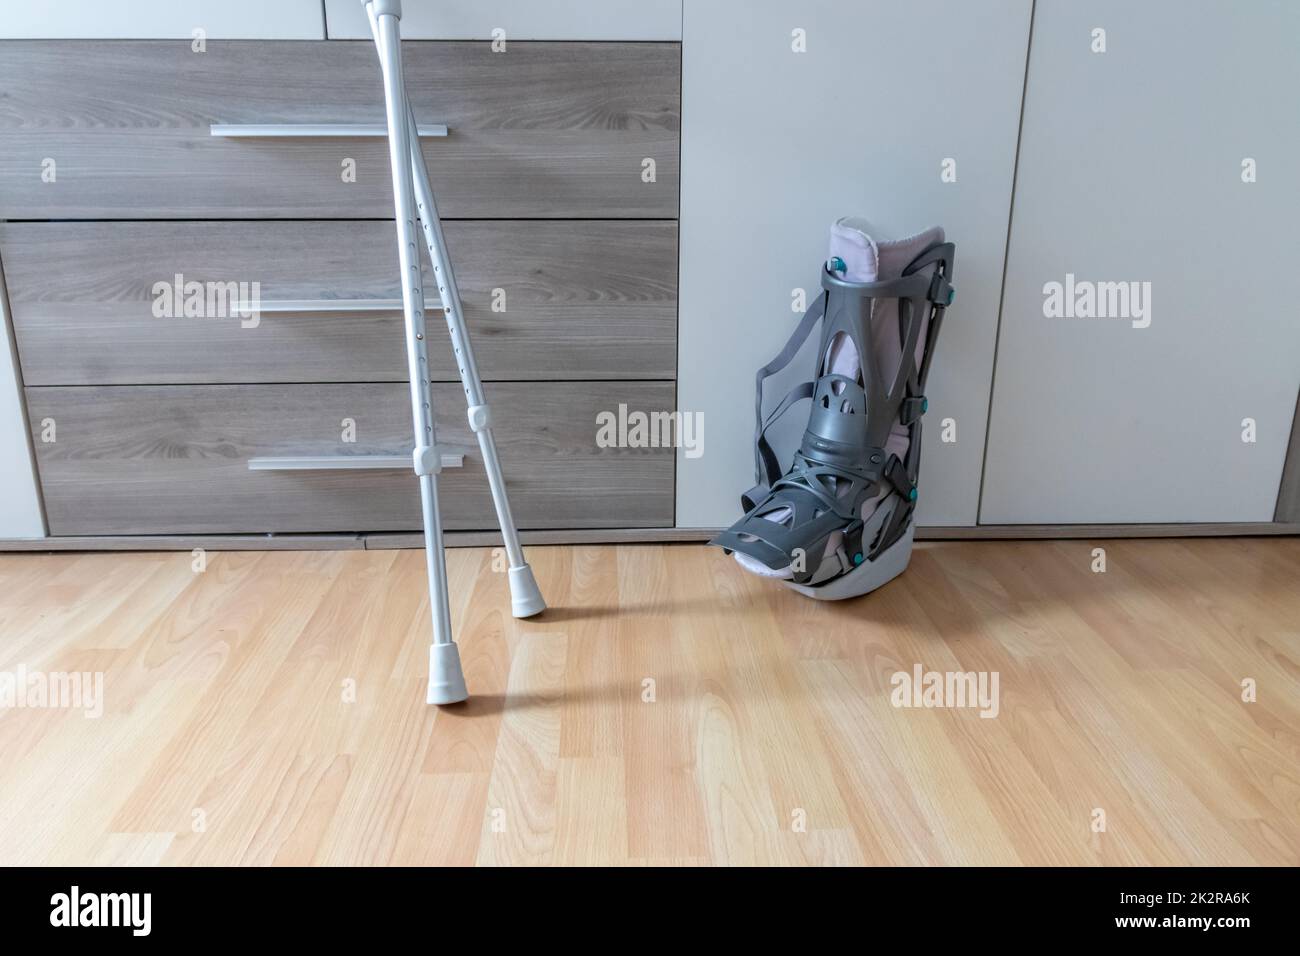 European man after Achilles tendon rupture operation is back home with moon boot special physiotherapy shoe and crutches for recovery at home against the hurting leg learning to walk first steps PWB Stock Photo